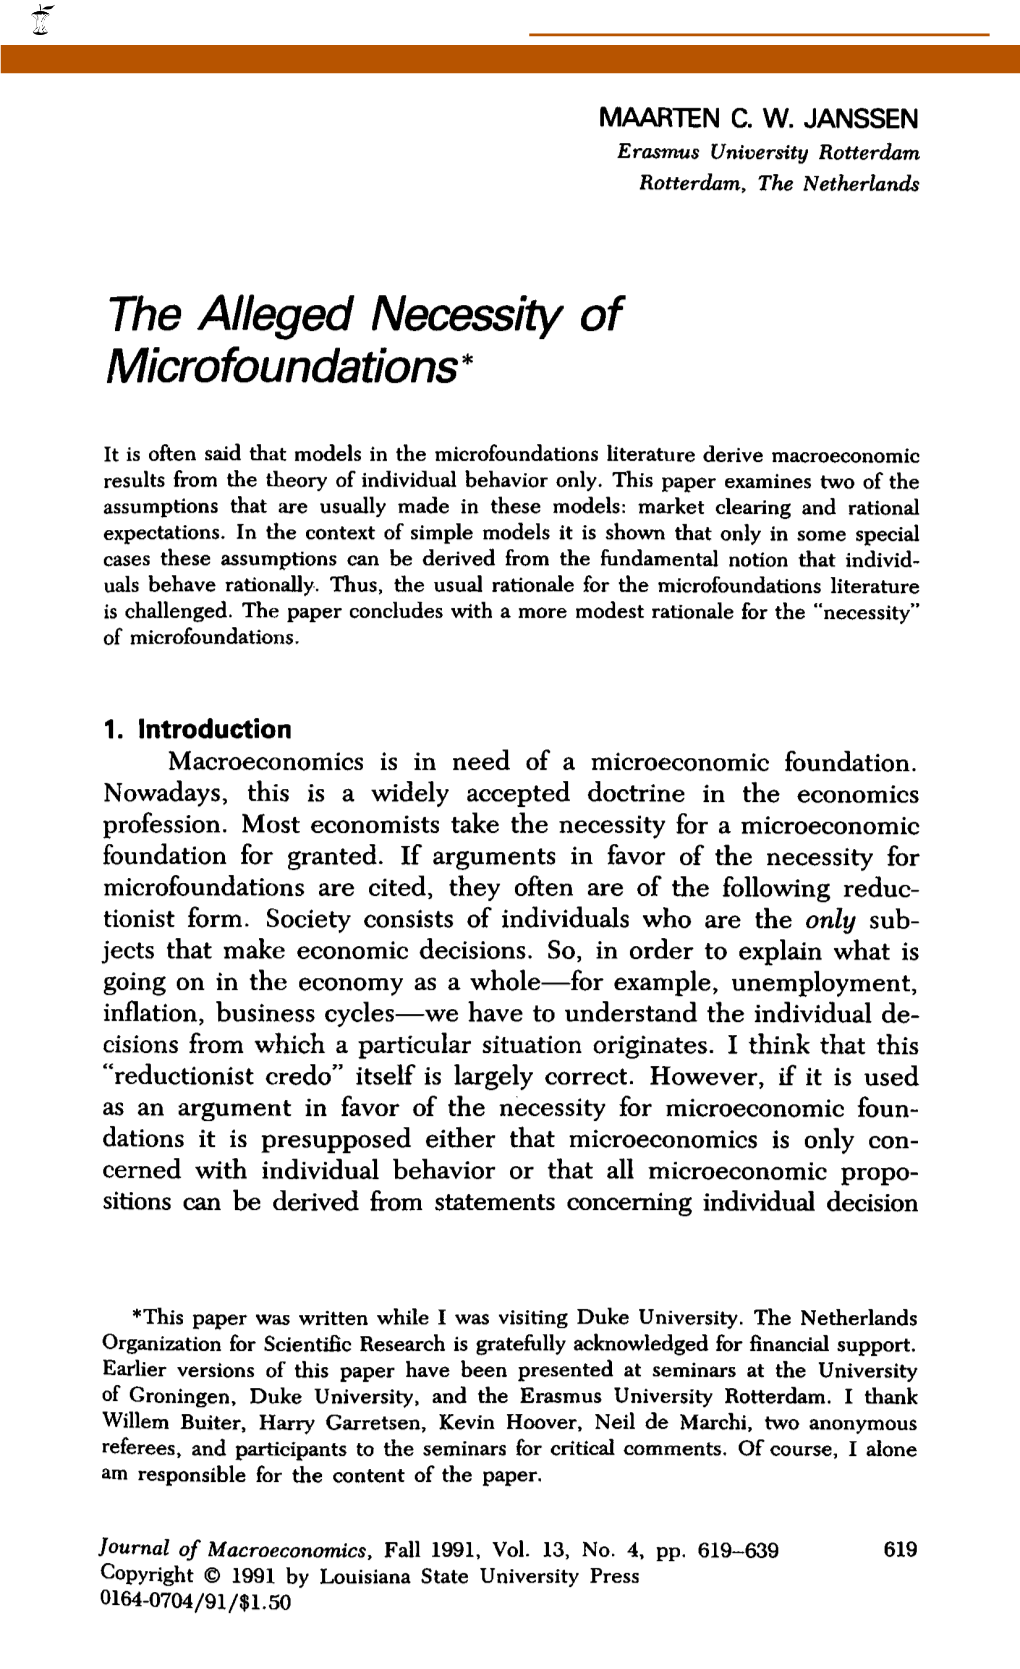 The Alleged Necessity of Microfoundations*